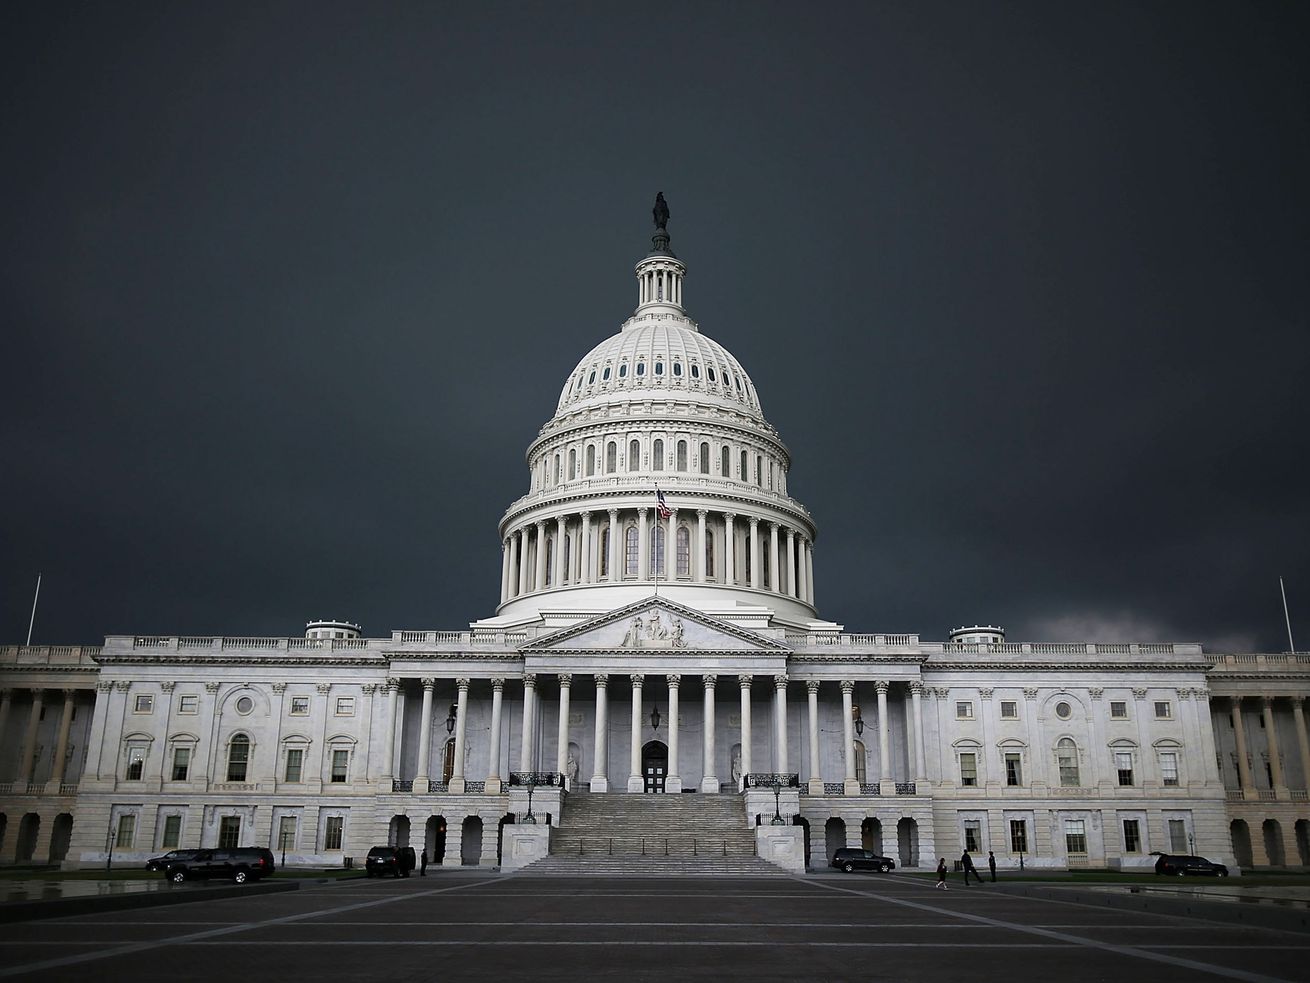 The US Capitol building with dark clouds behind it.